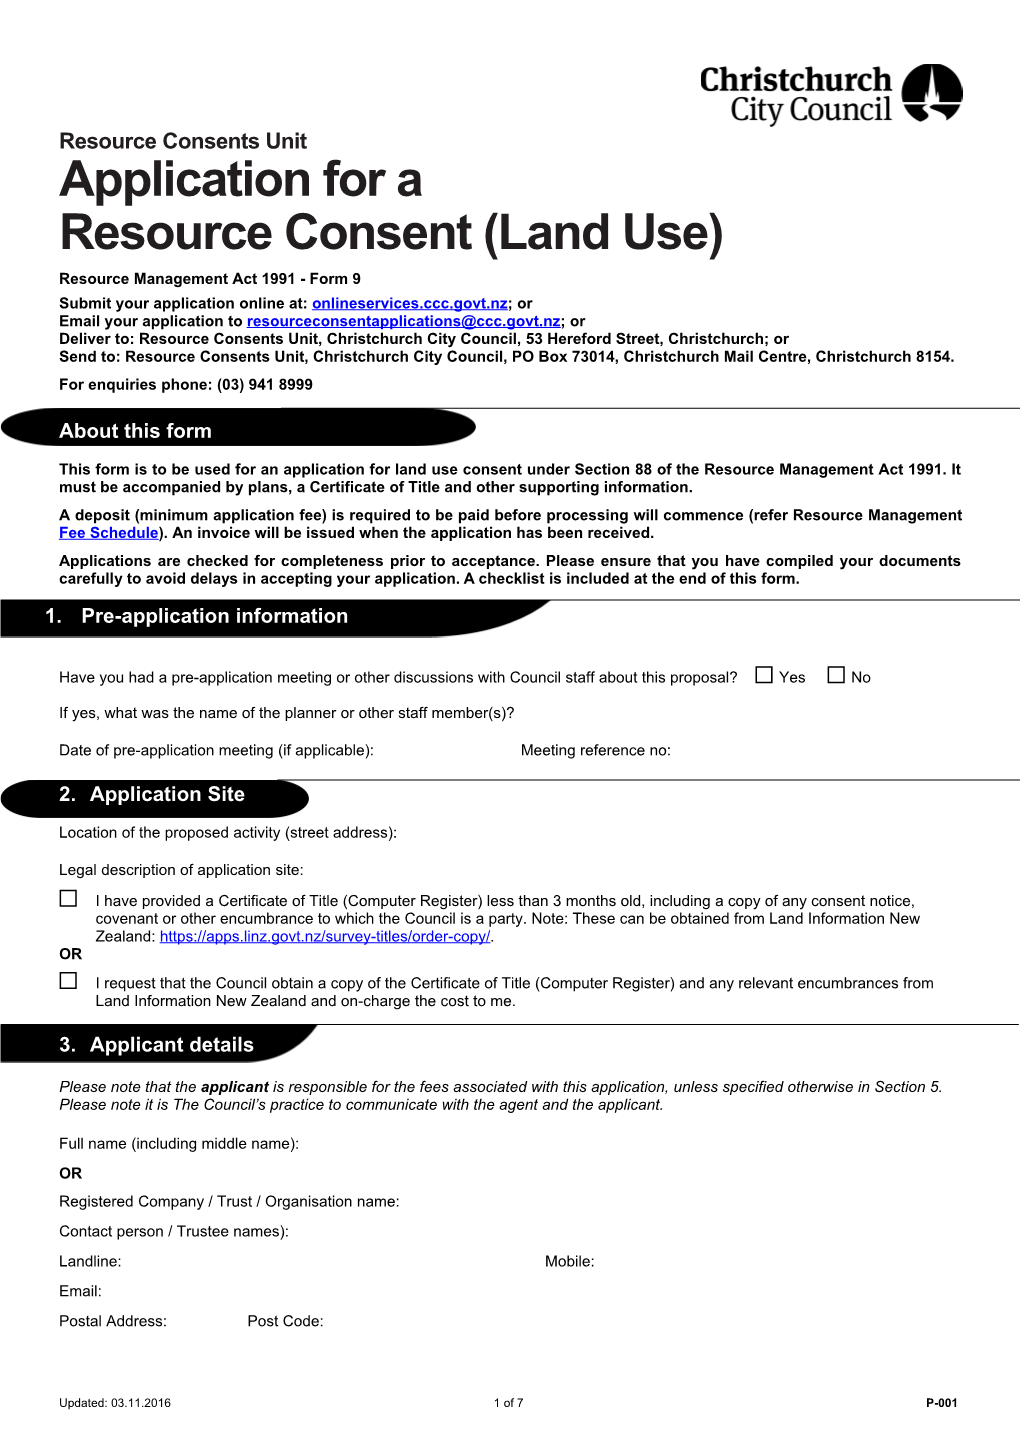 P-001 - Application for Resource Consent (Land Use)